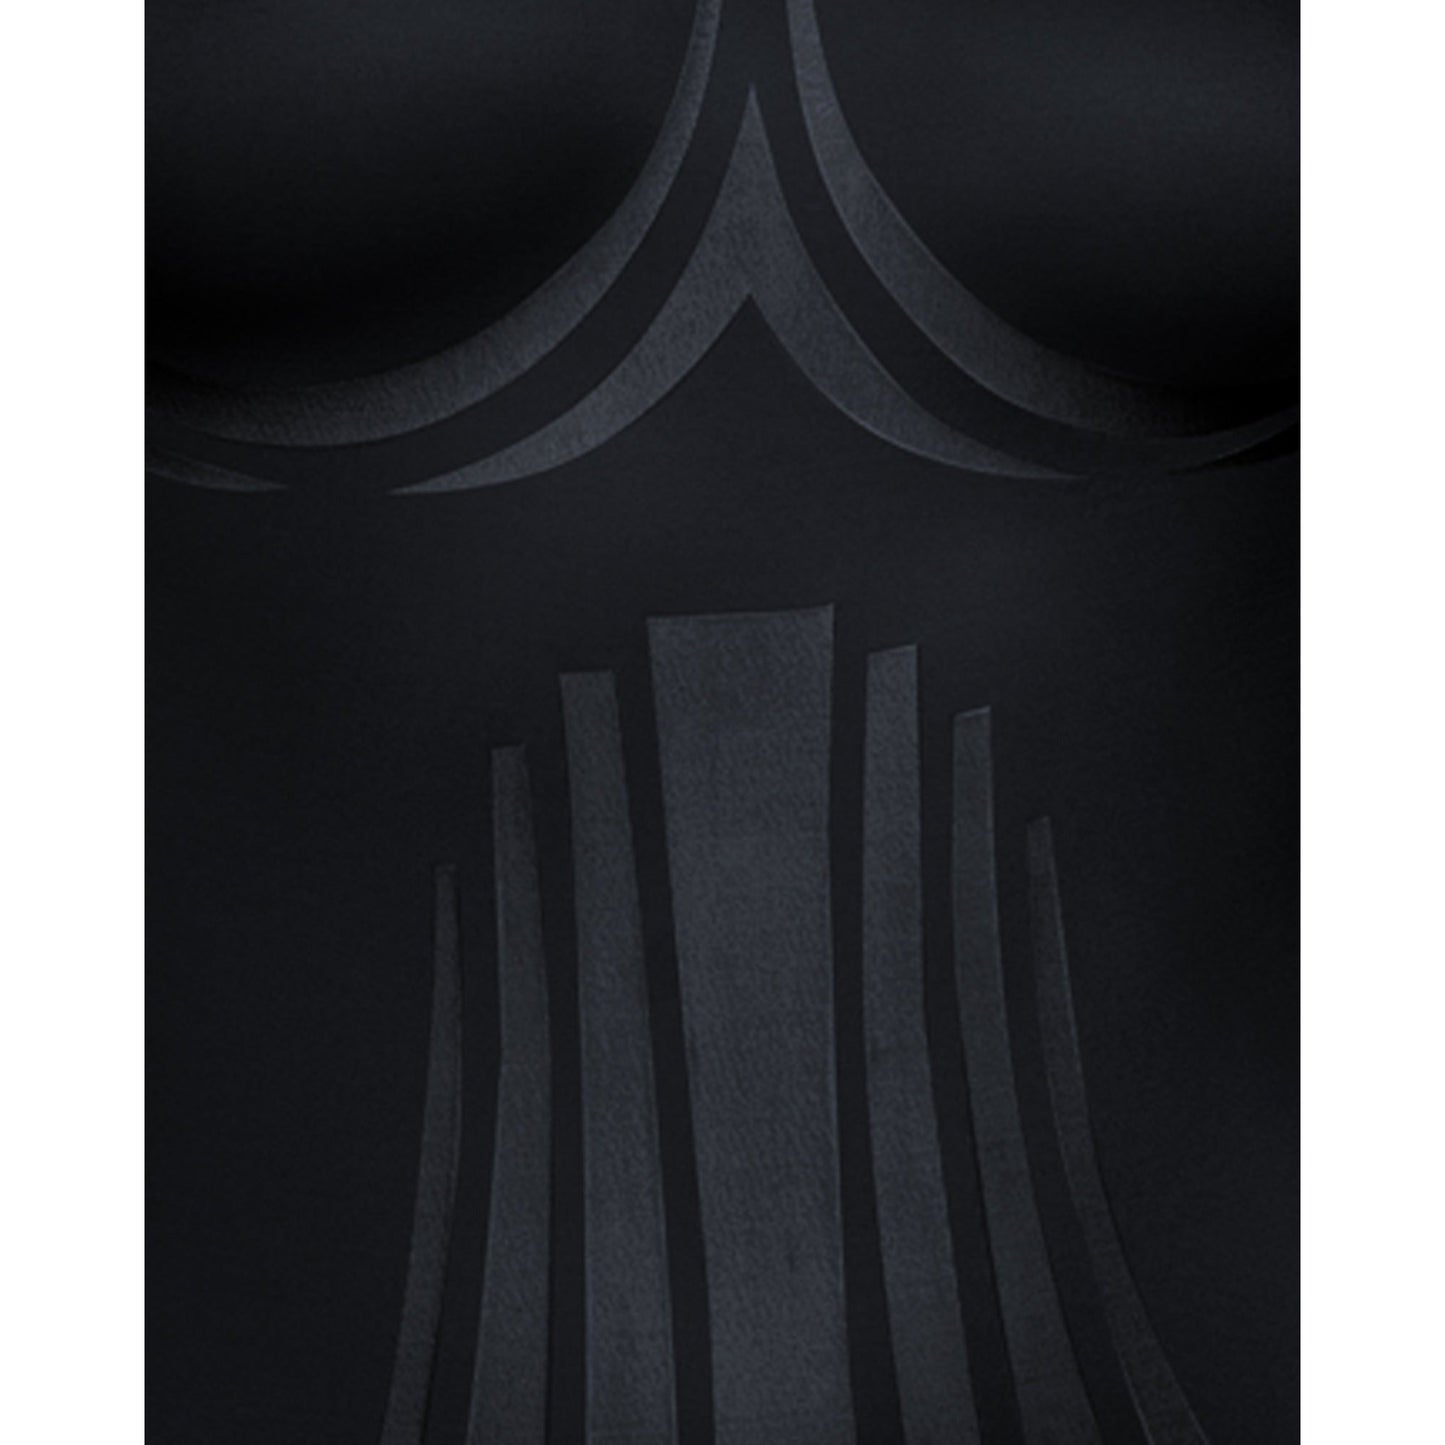 LycraÂ® FitSenseâ„¢ Extra Firm Control Shaping Bodysuit - Style Gallery